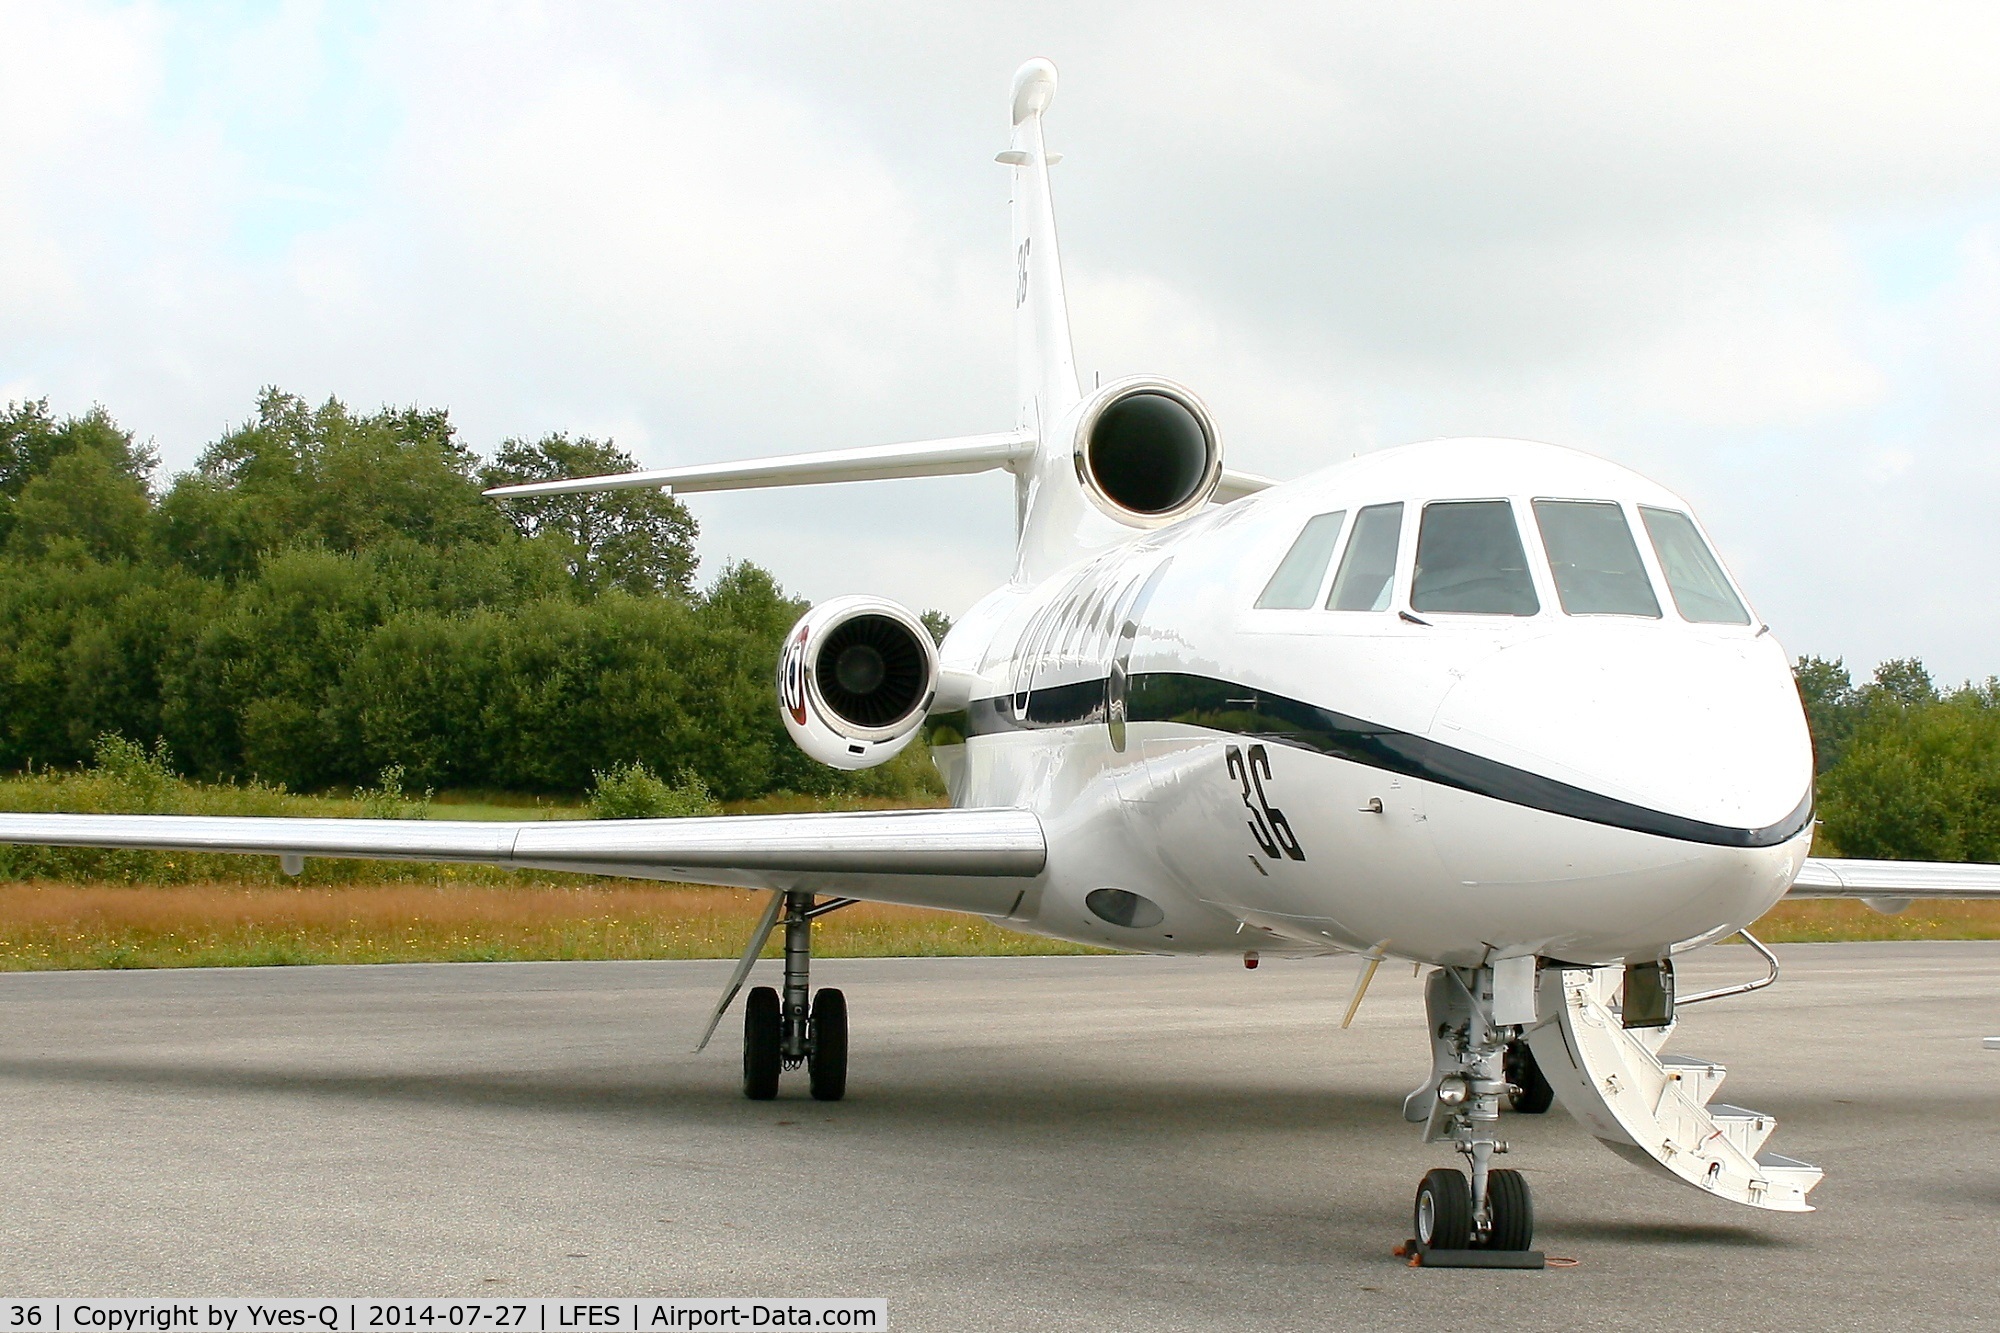 36, 1980 Dassault Falcon 50 C/N 36, French naval aviation Dassault Falcon 50, Static display, Guiscriff airfield (LFES) open day 2014